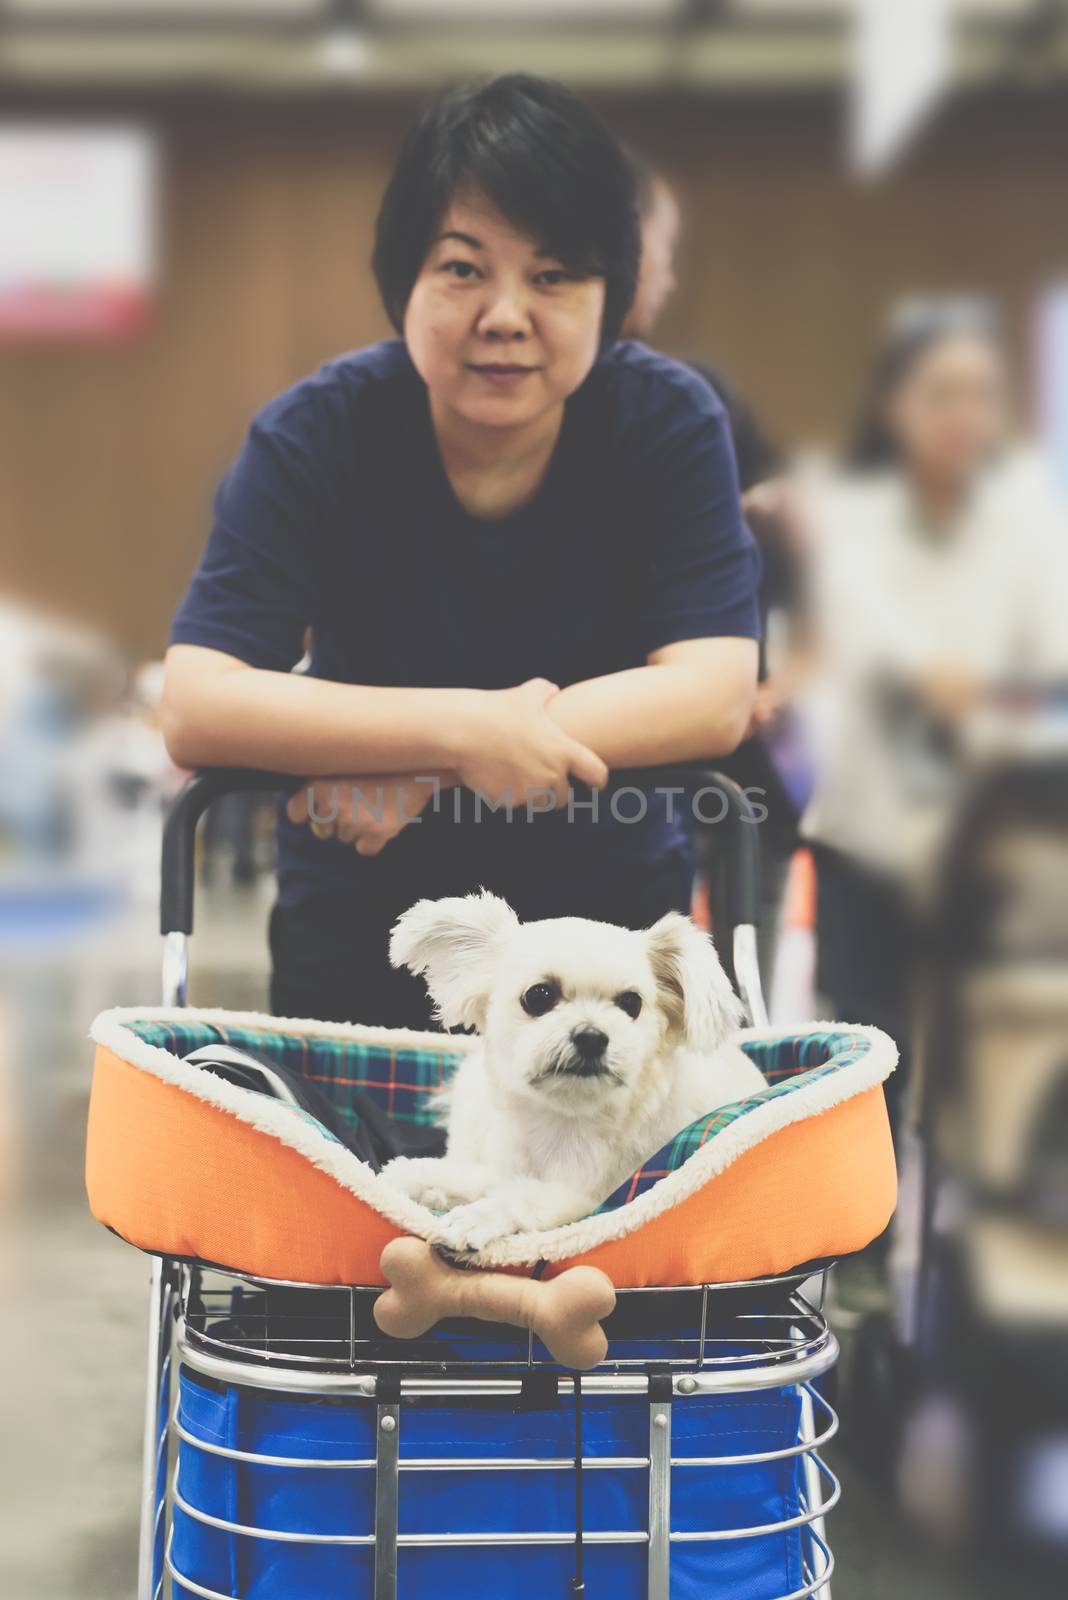 Asian woman feeling happy when her and her pet (The dog) on shopping cart allowed to entrance for exhibit hall or expo